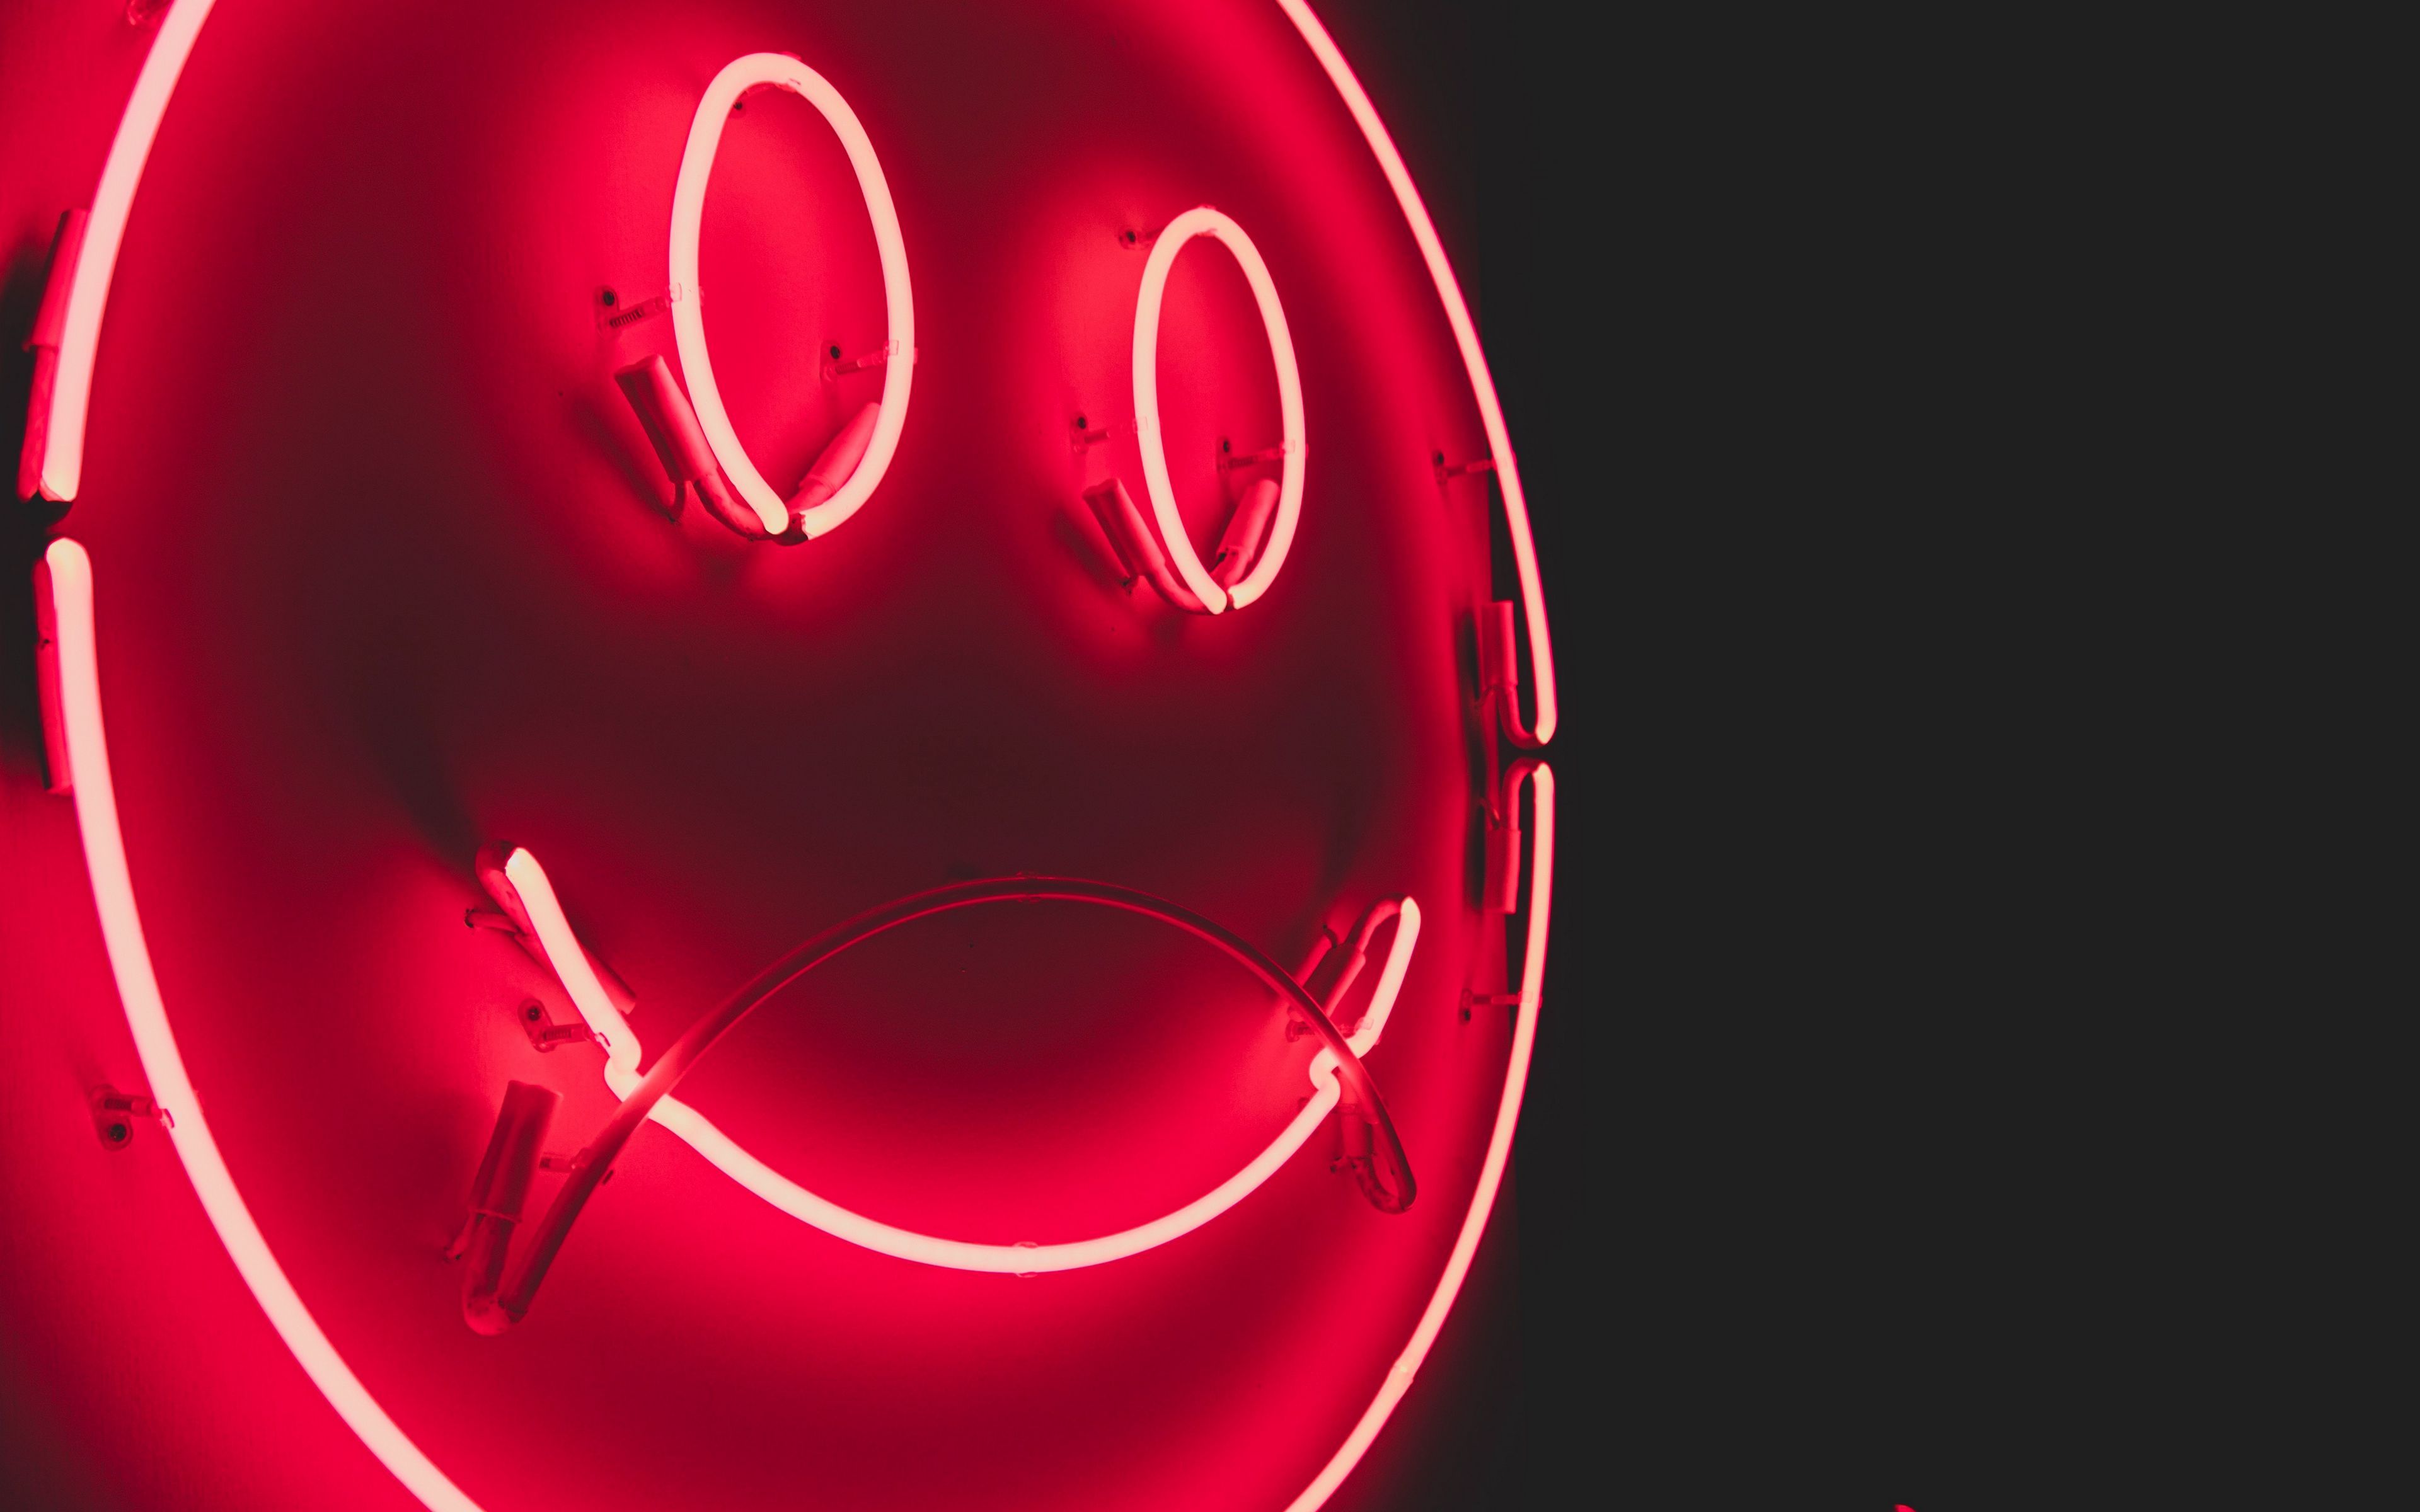 Download wallpaper 3840x2400 smile, smiley, neon, glow, red 4k ultra HD 16:10 HD background